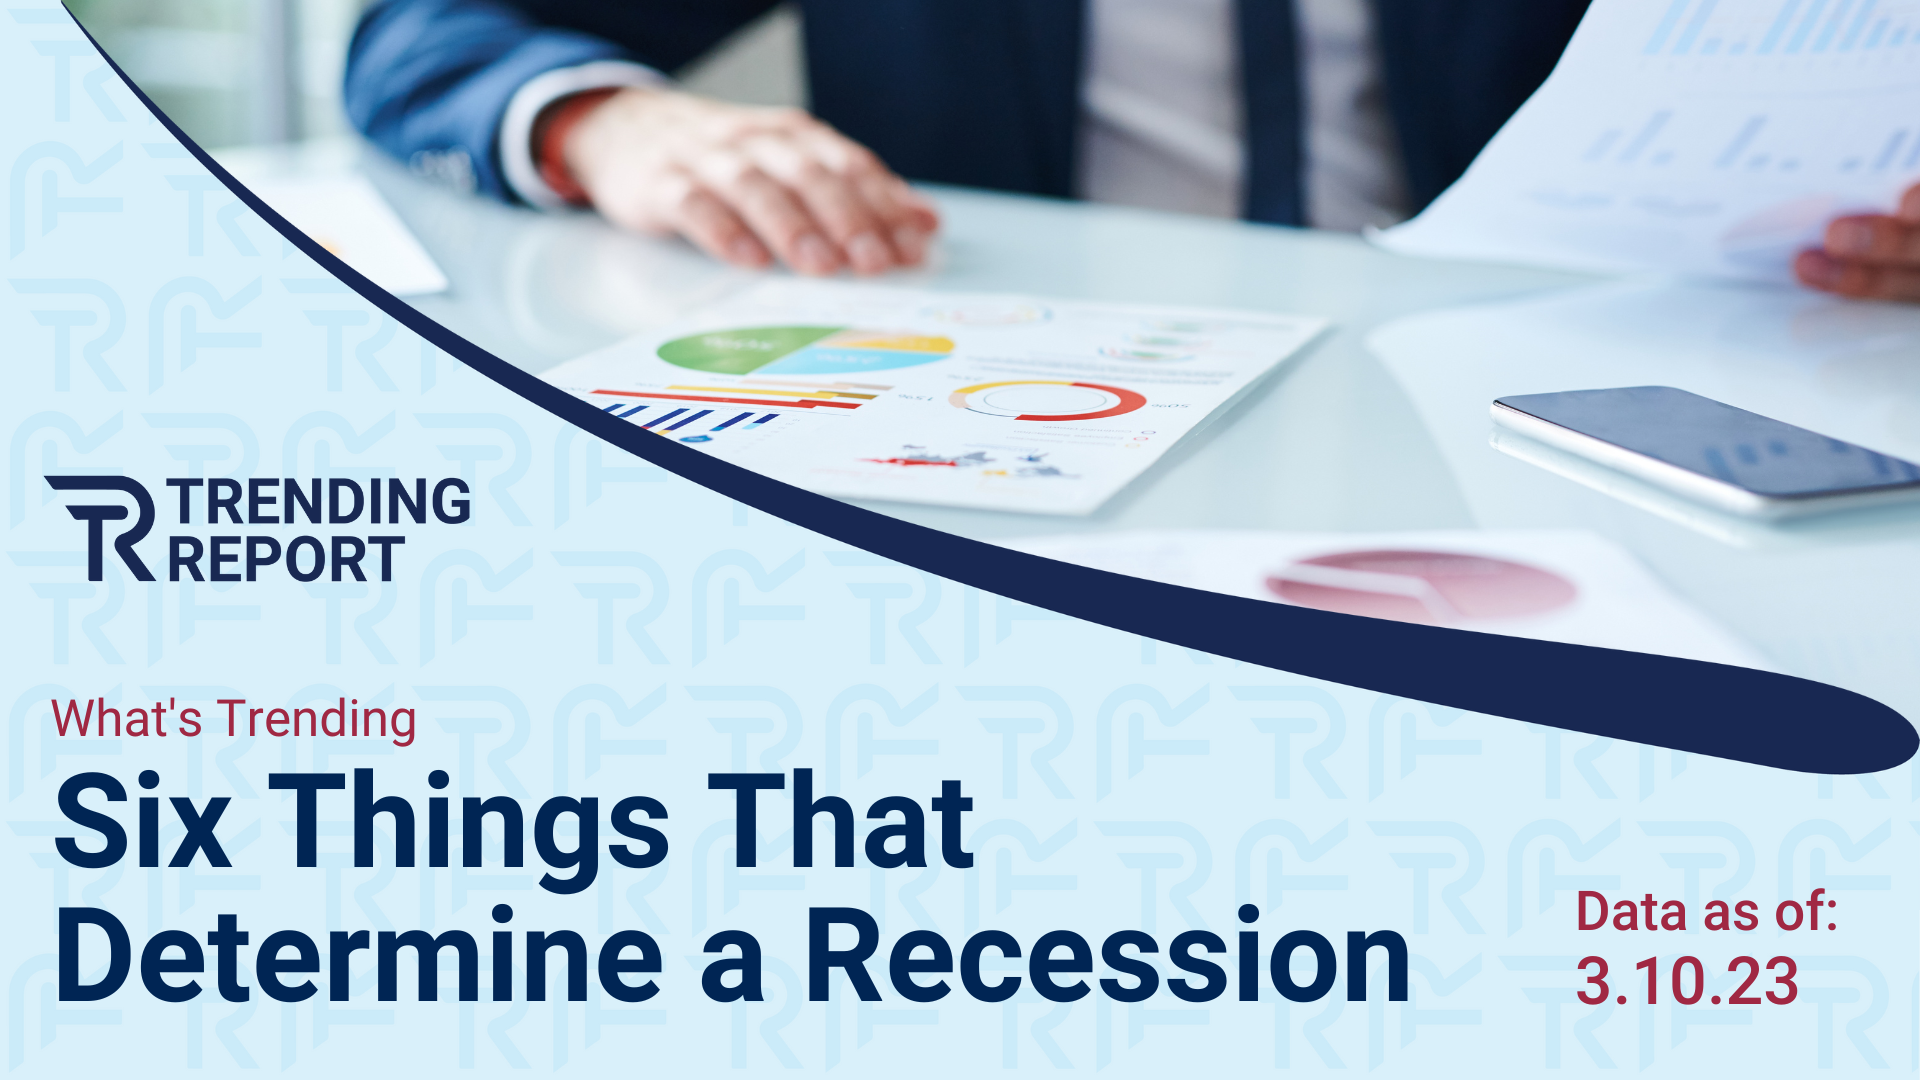 What's Trending: 6 Things That Determine a Recession